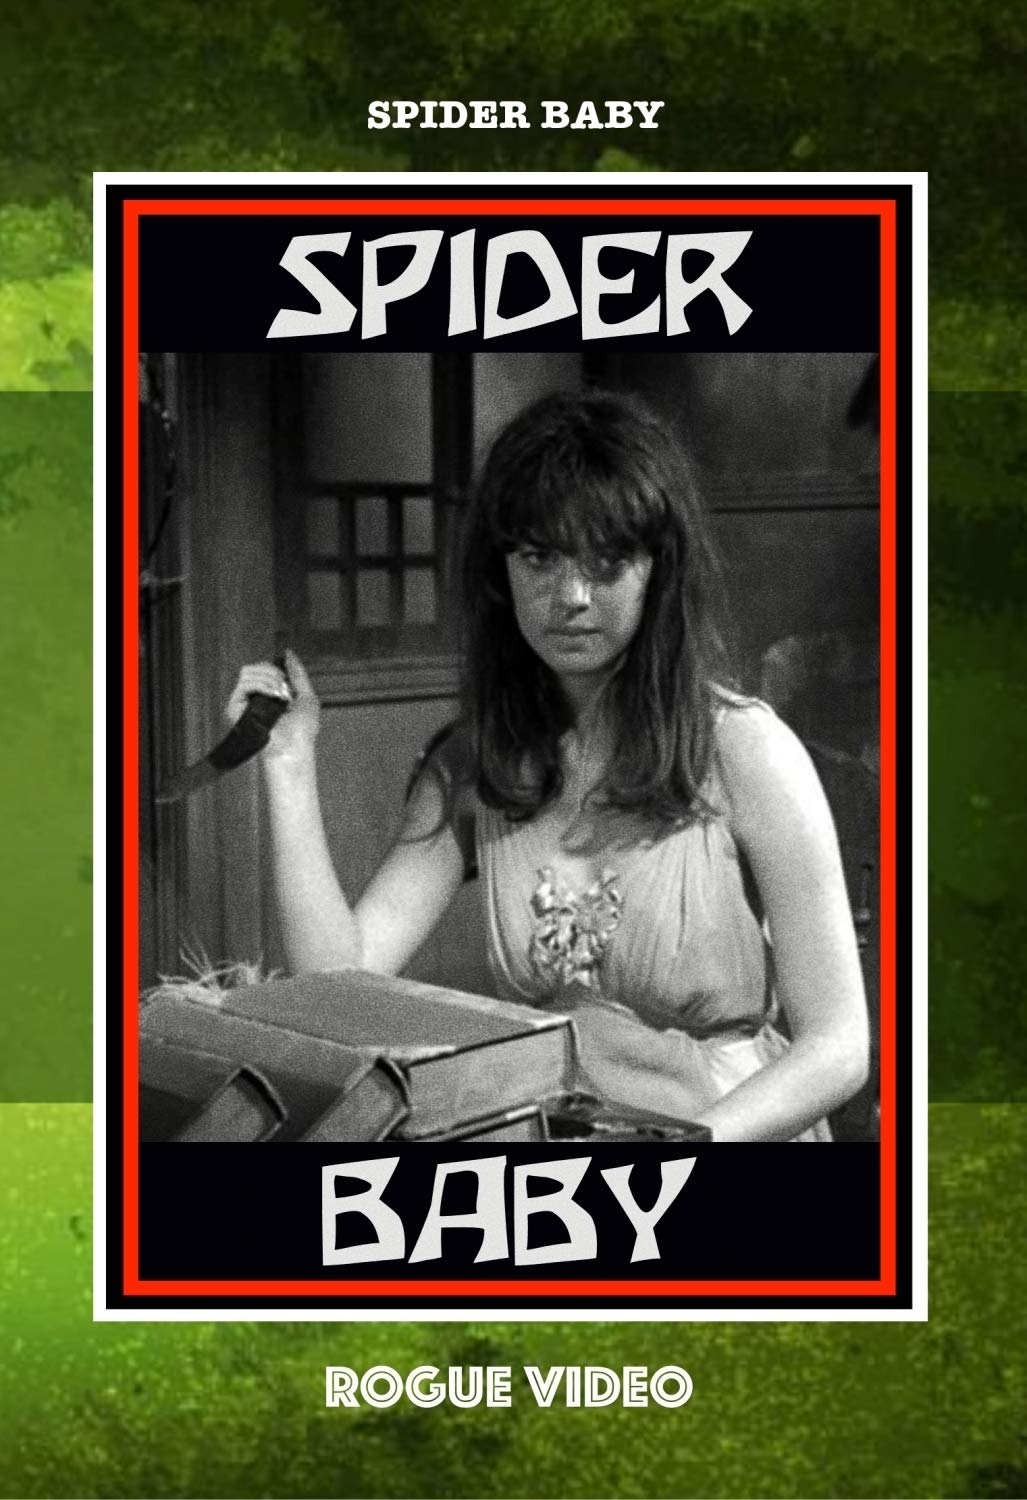 ROGUE VIDEO rare horror DVDs / cult films & fiction: "SPIDER BABY"